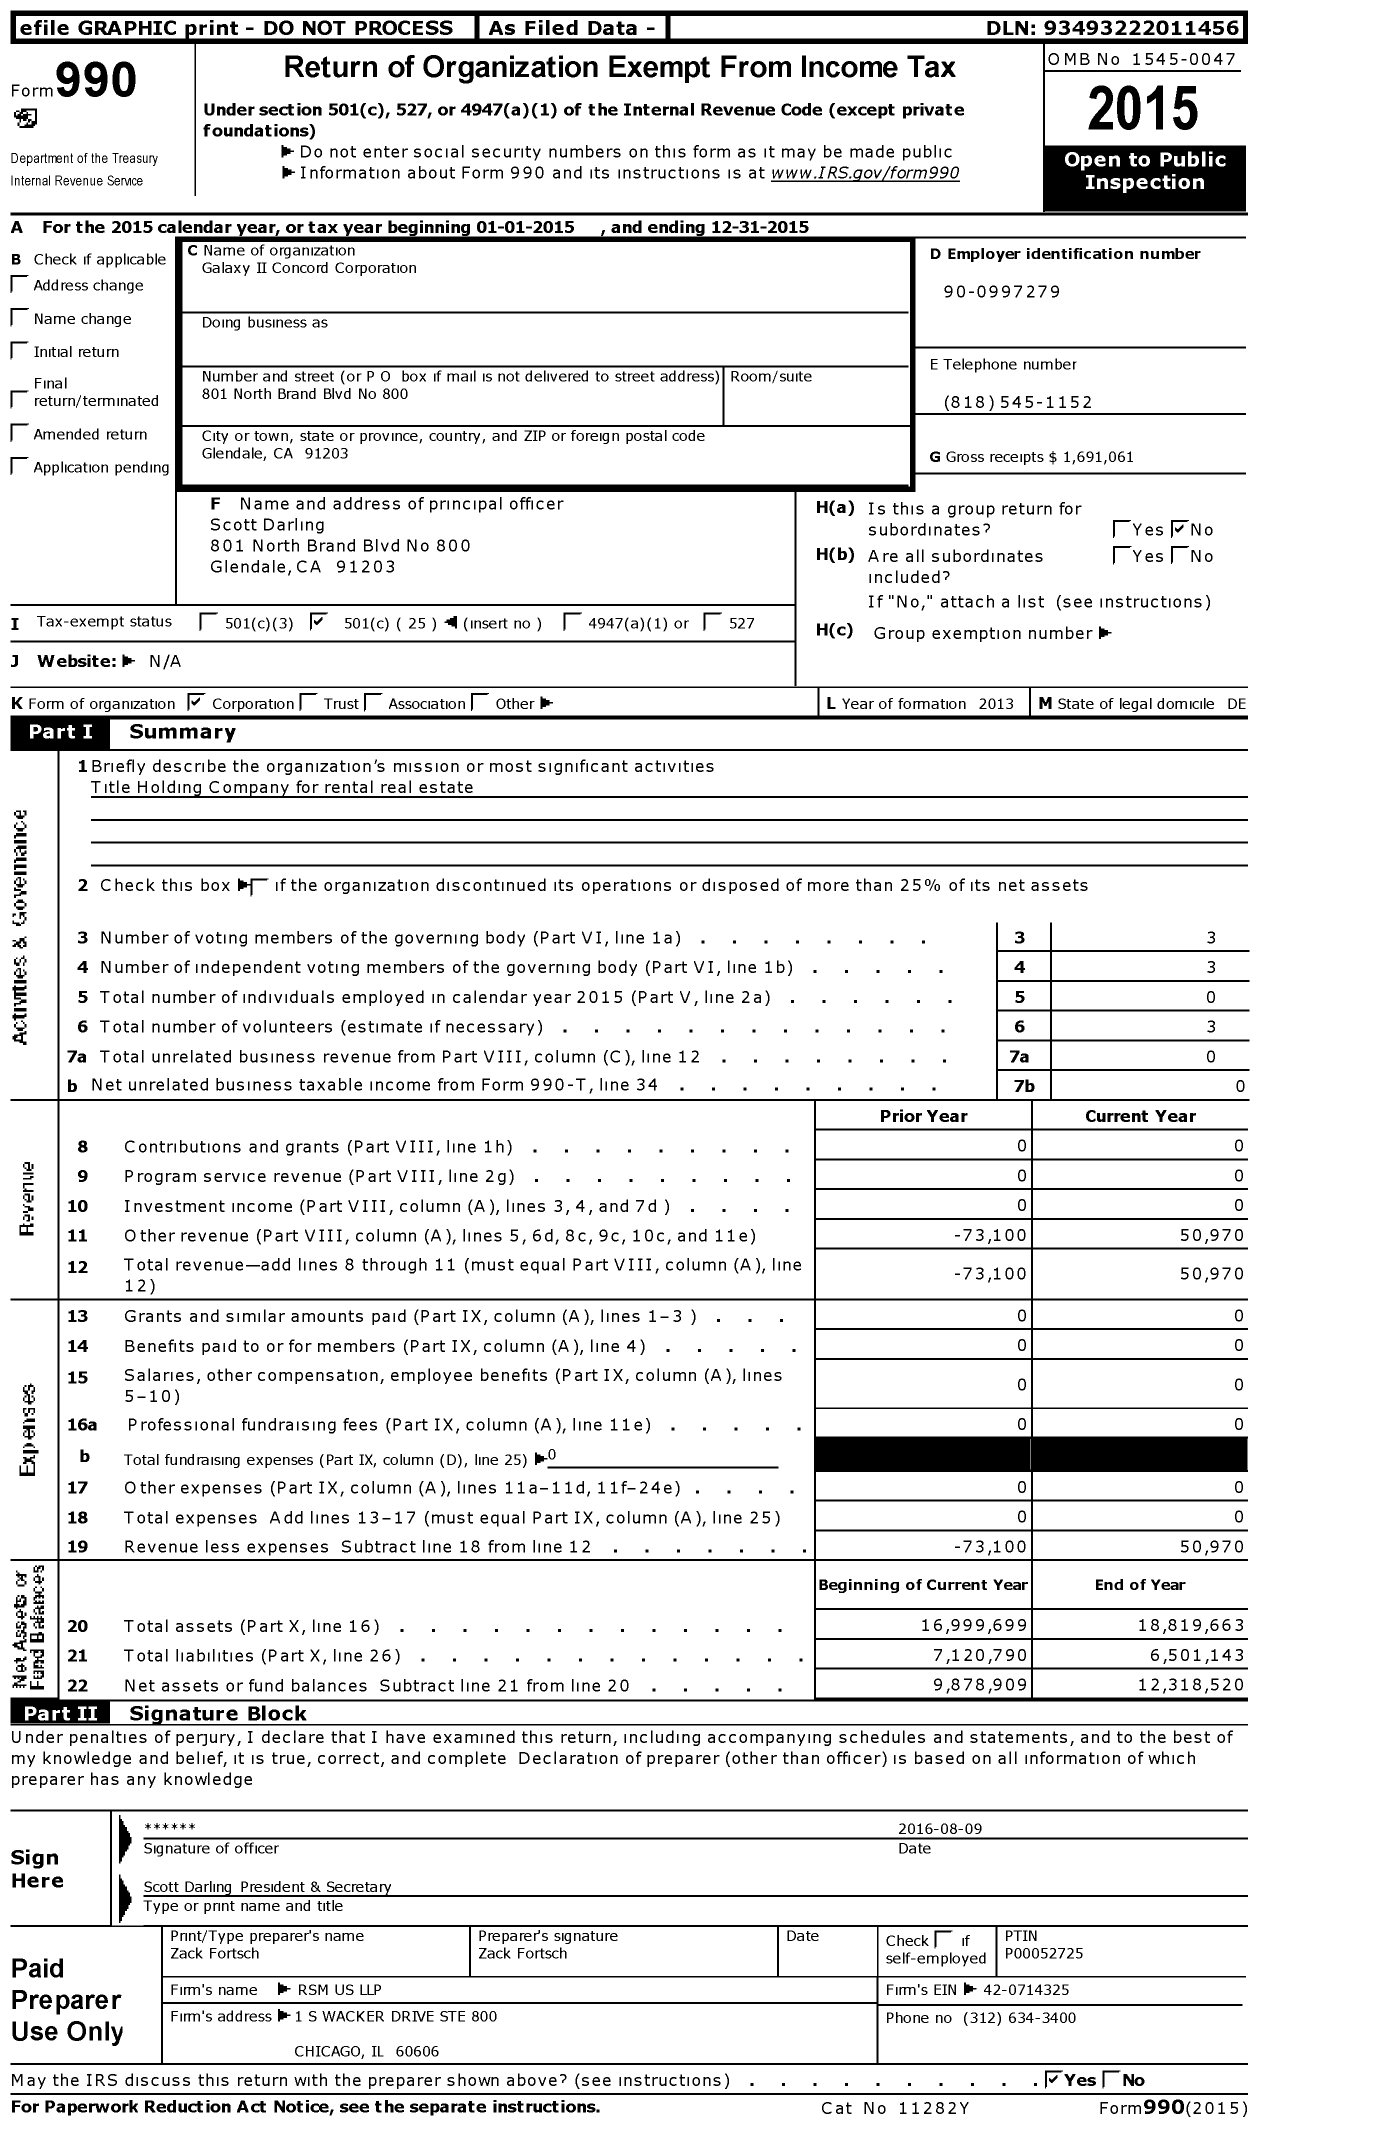 Image of first page of 2015 Form 990O for Galaxy II Concord Corporation